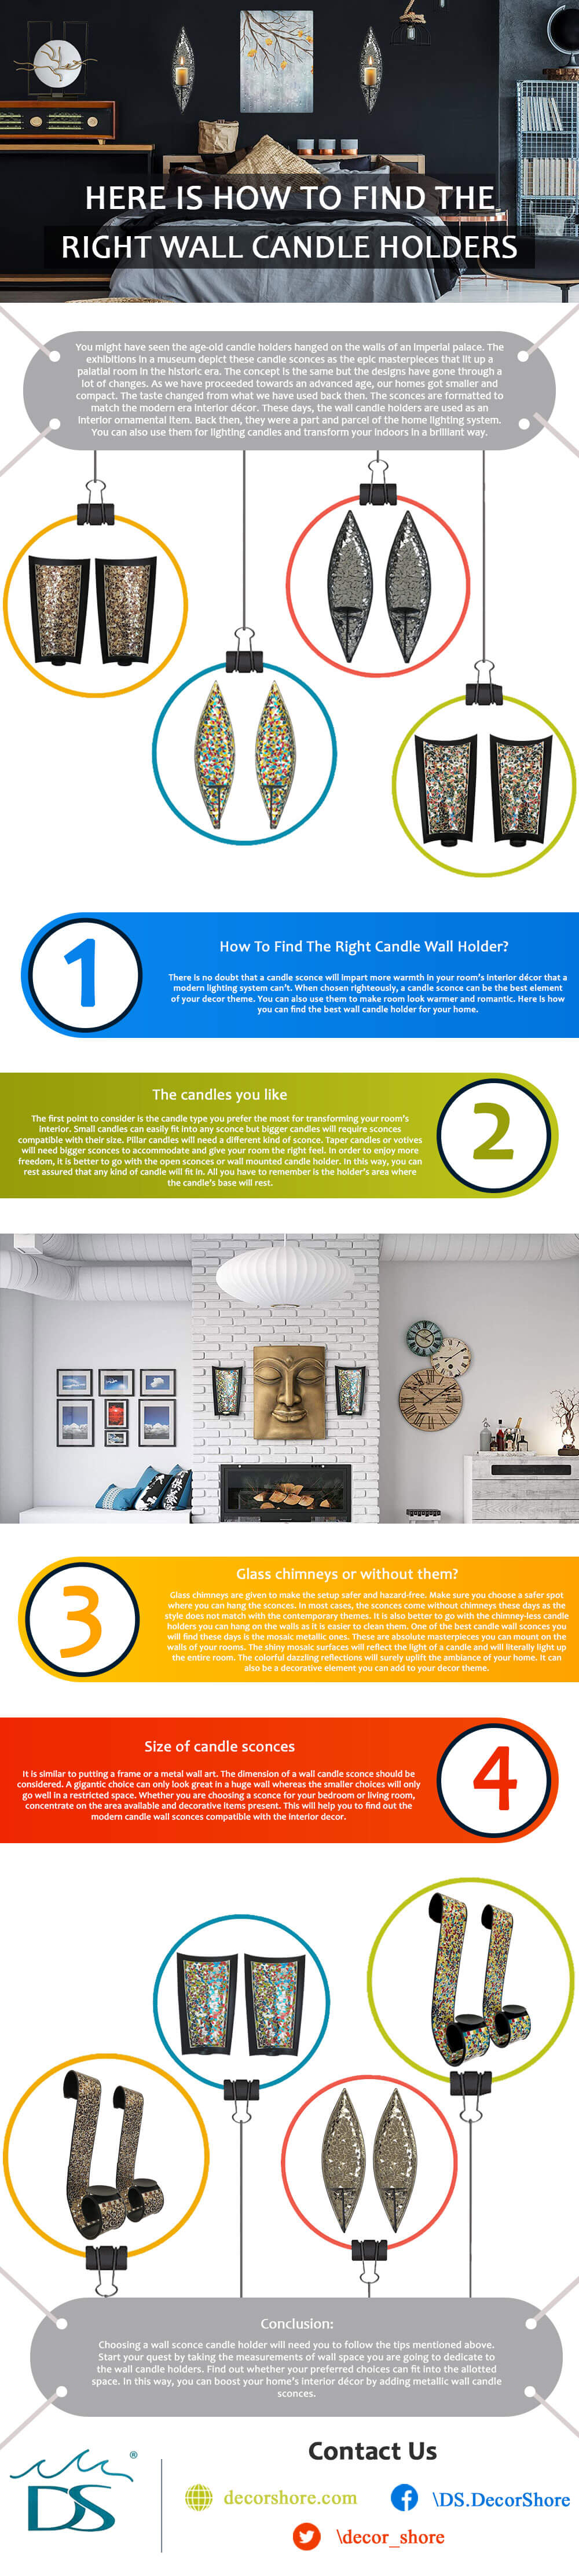 here-is-how-to-find-the-right-wall-candle-holders-infographic-plaza